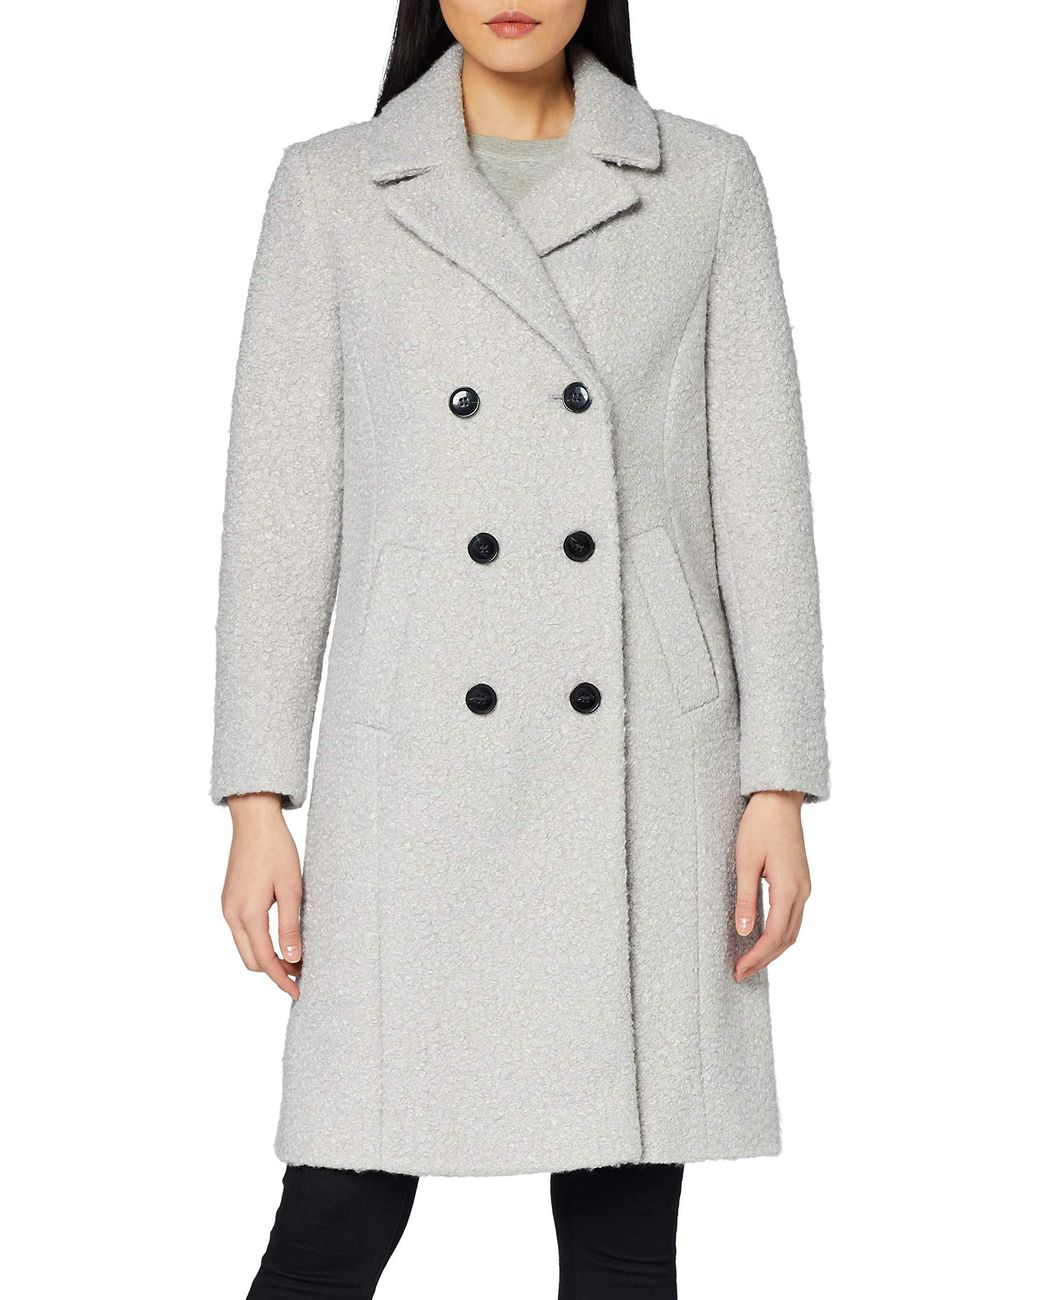 Dorothy Perkins Midi Boucle Double Breasted Light Coat in Grey - Lyst